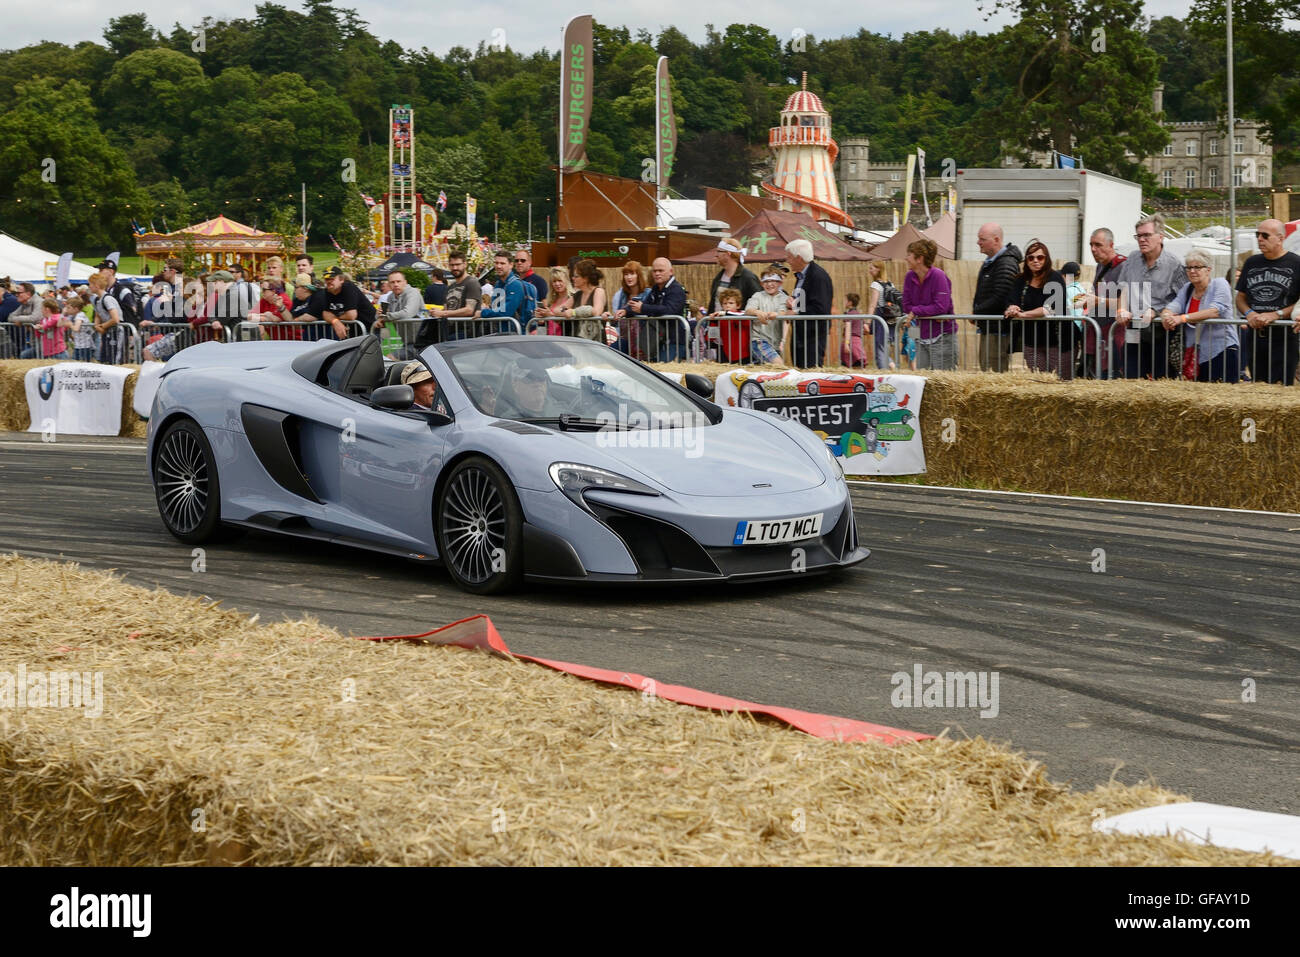 Carfest North, Bolesworth, Cheshire, UK. 30th July 2016. A McLaren Spyder on the track. The event is the brainchild of Chris Evans and features 3 days of cars, music and entertainment with profits being donated to the charity Children in Need. Andrew Paterson/Alamy Live News Stock Photo